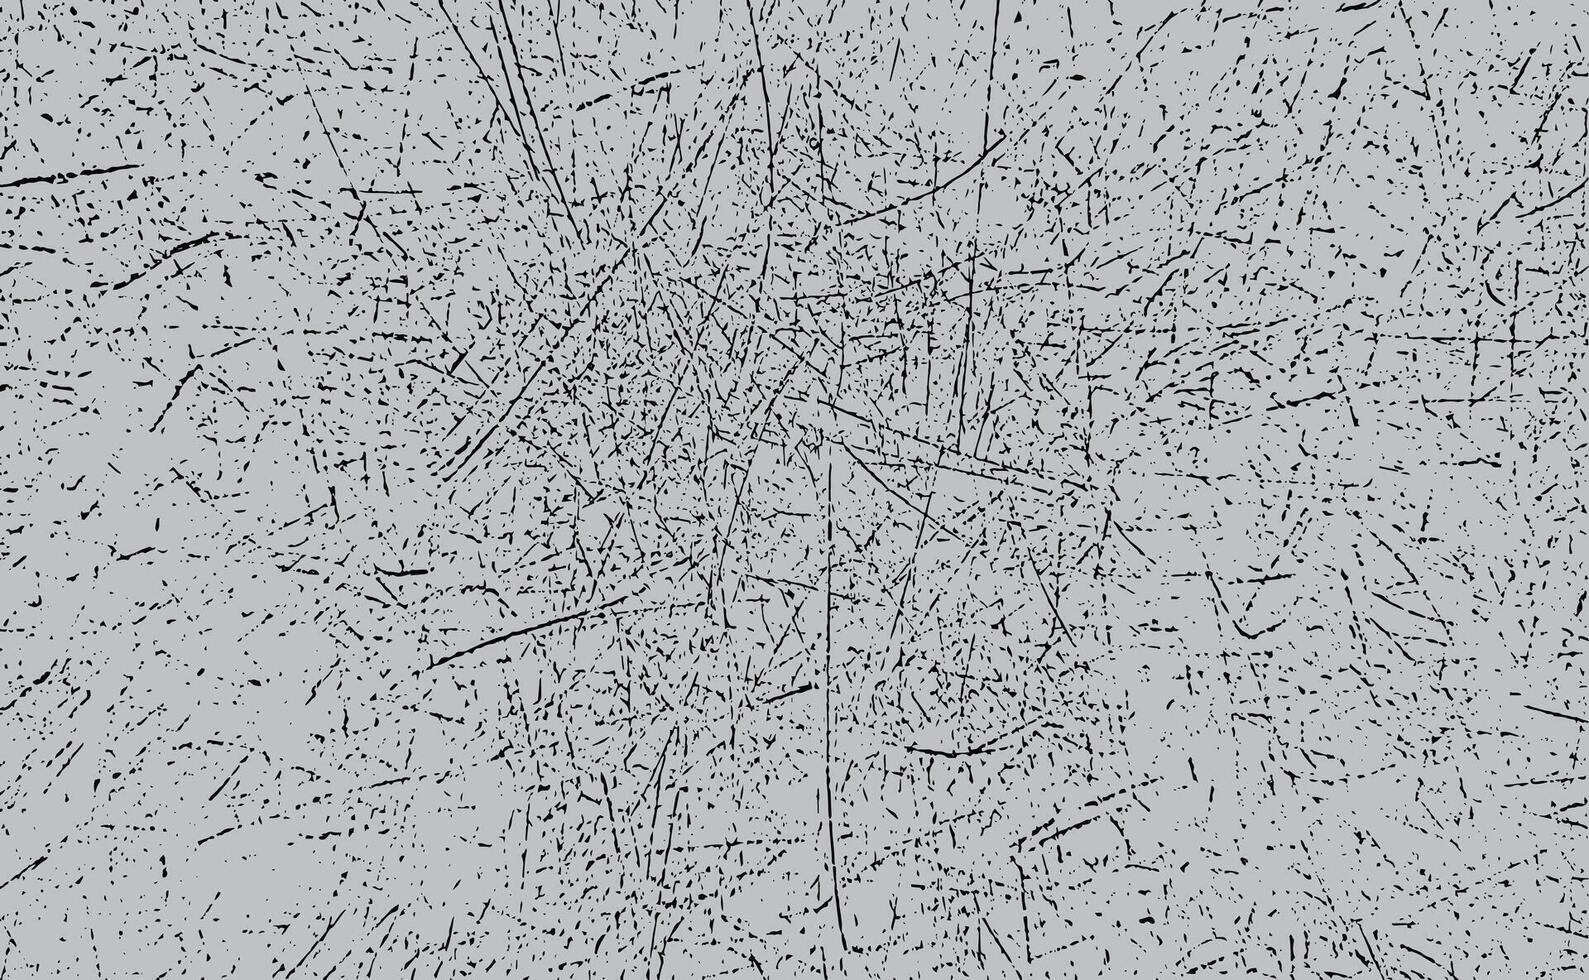 a black and white drawing of a wall with many lines and scribble effect on grey background, old paper texture, textured of the old wall, vintage grungy effect vector